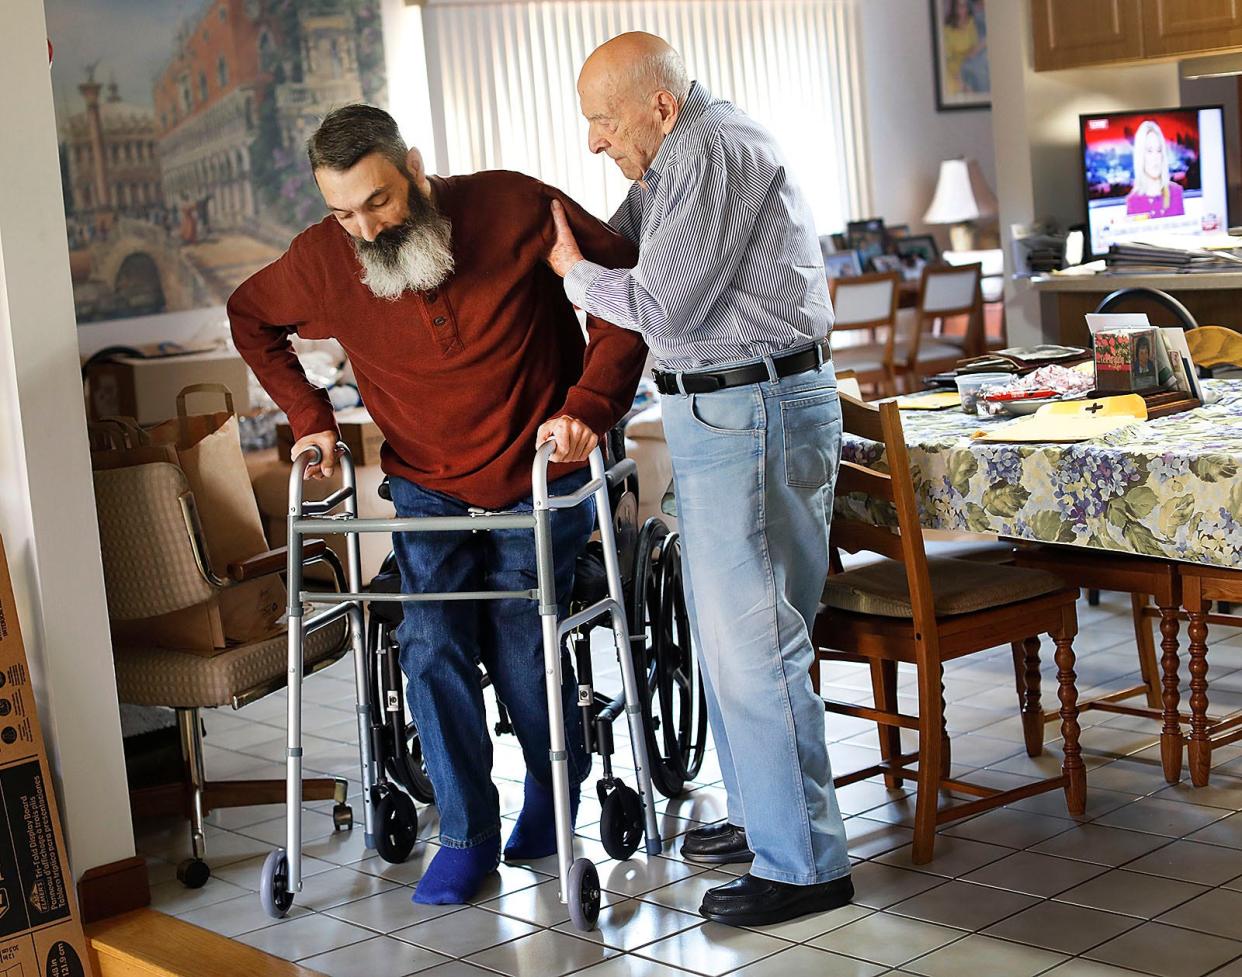 Ninety-five-year-old Carmine "Charlie" Mazzulli, right, is a hero to his son Bob, 53.